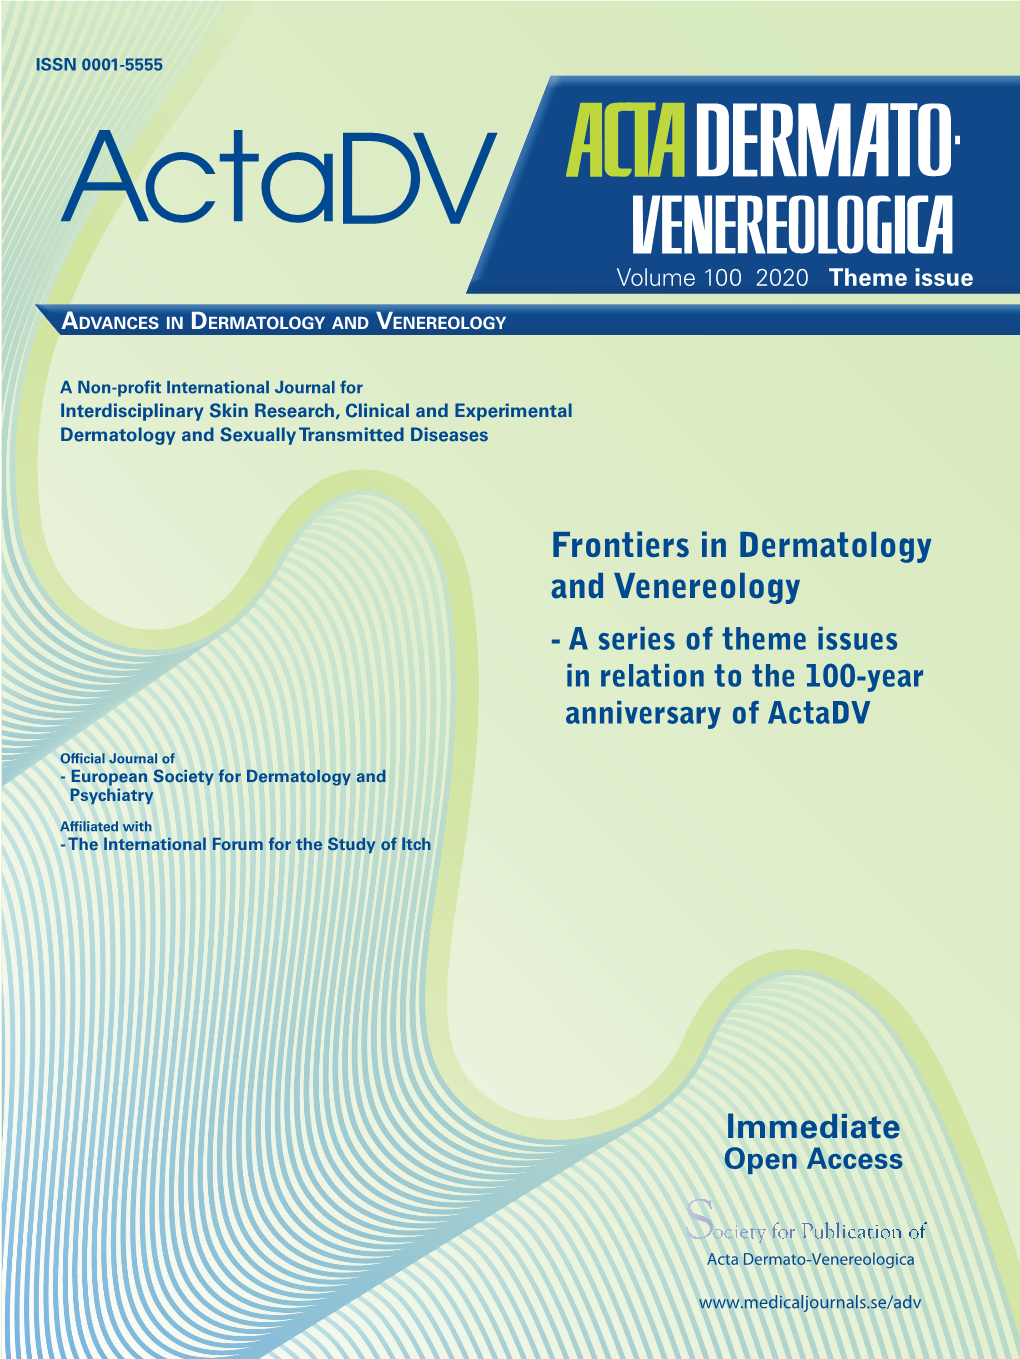 Frontiers in Dermatology and Venereology - a Series of Theme Issues in Relation to the 100-Year Anniversary of Actadv